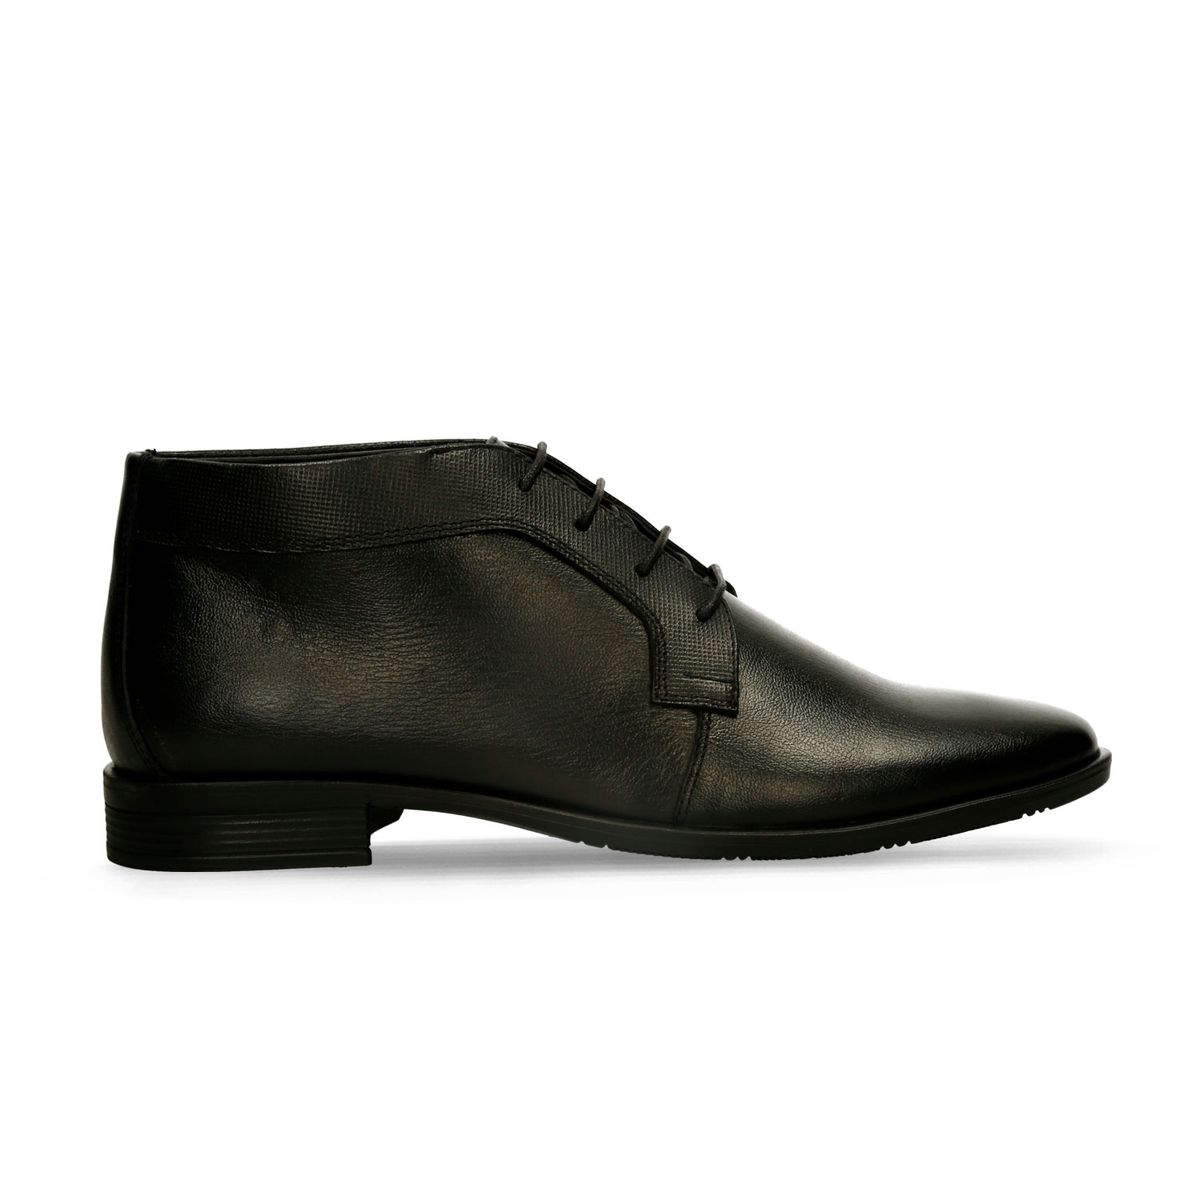 Zapatos Formales Negro Bata Emmerson Boot Hombre